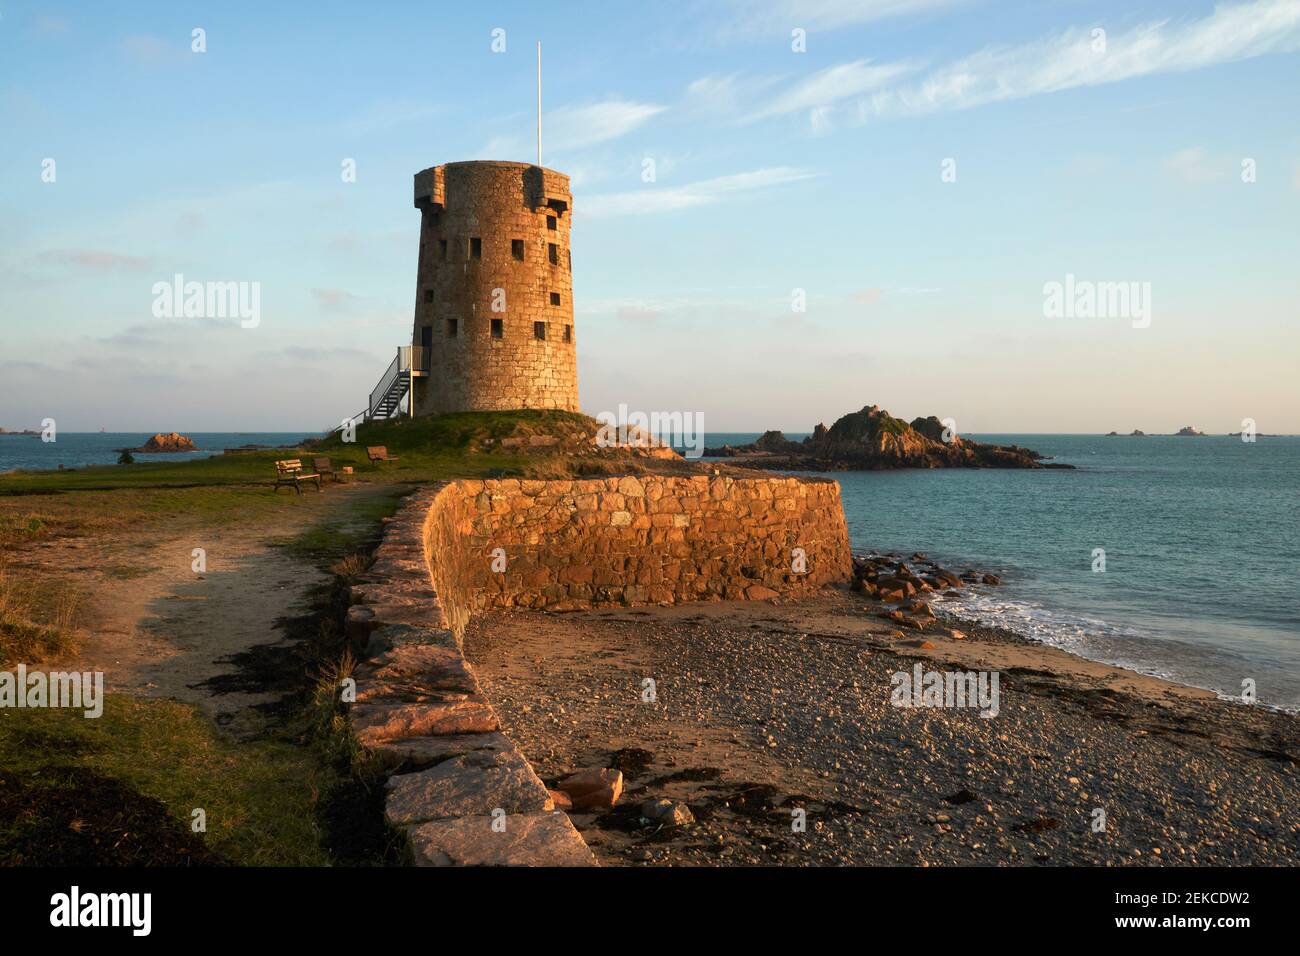 Le Hocq tower in Jersey, one of the Channel Islands. The tower was built in 1781 to defend against invasion from the sea. Stock Photo